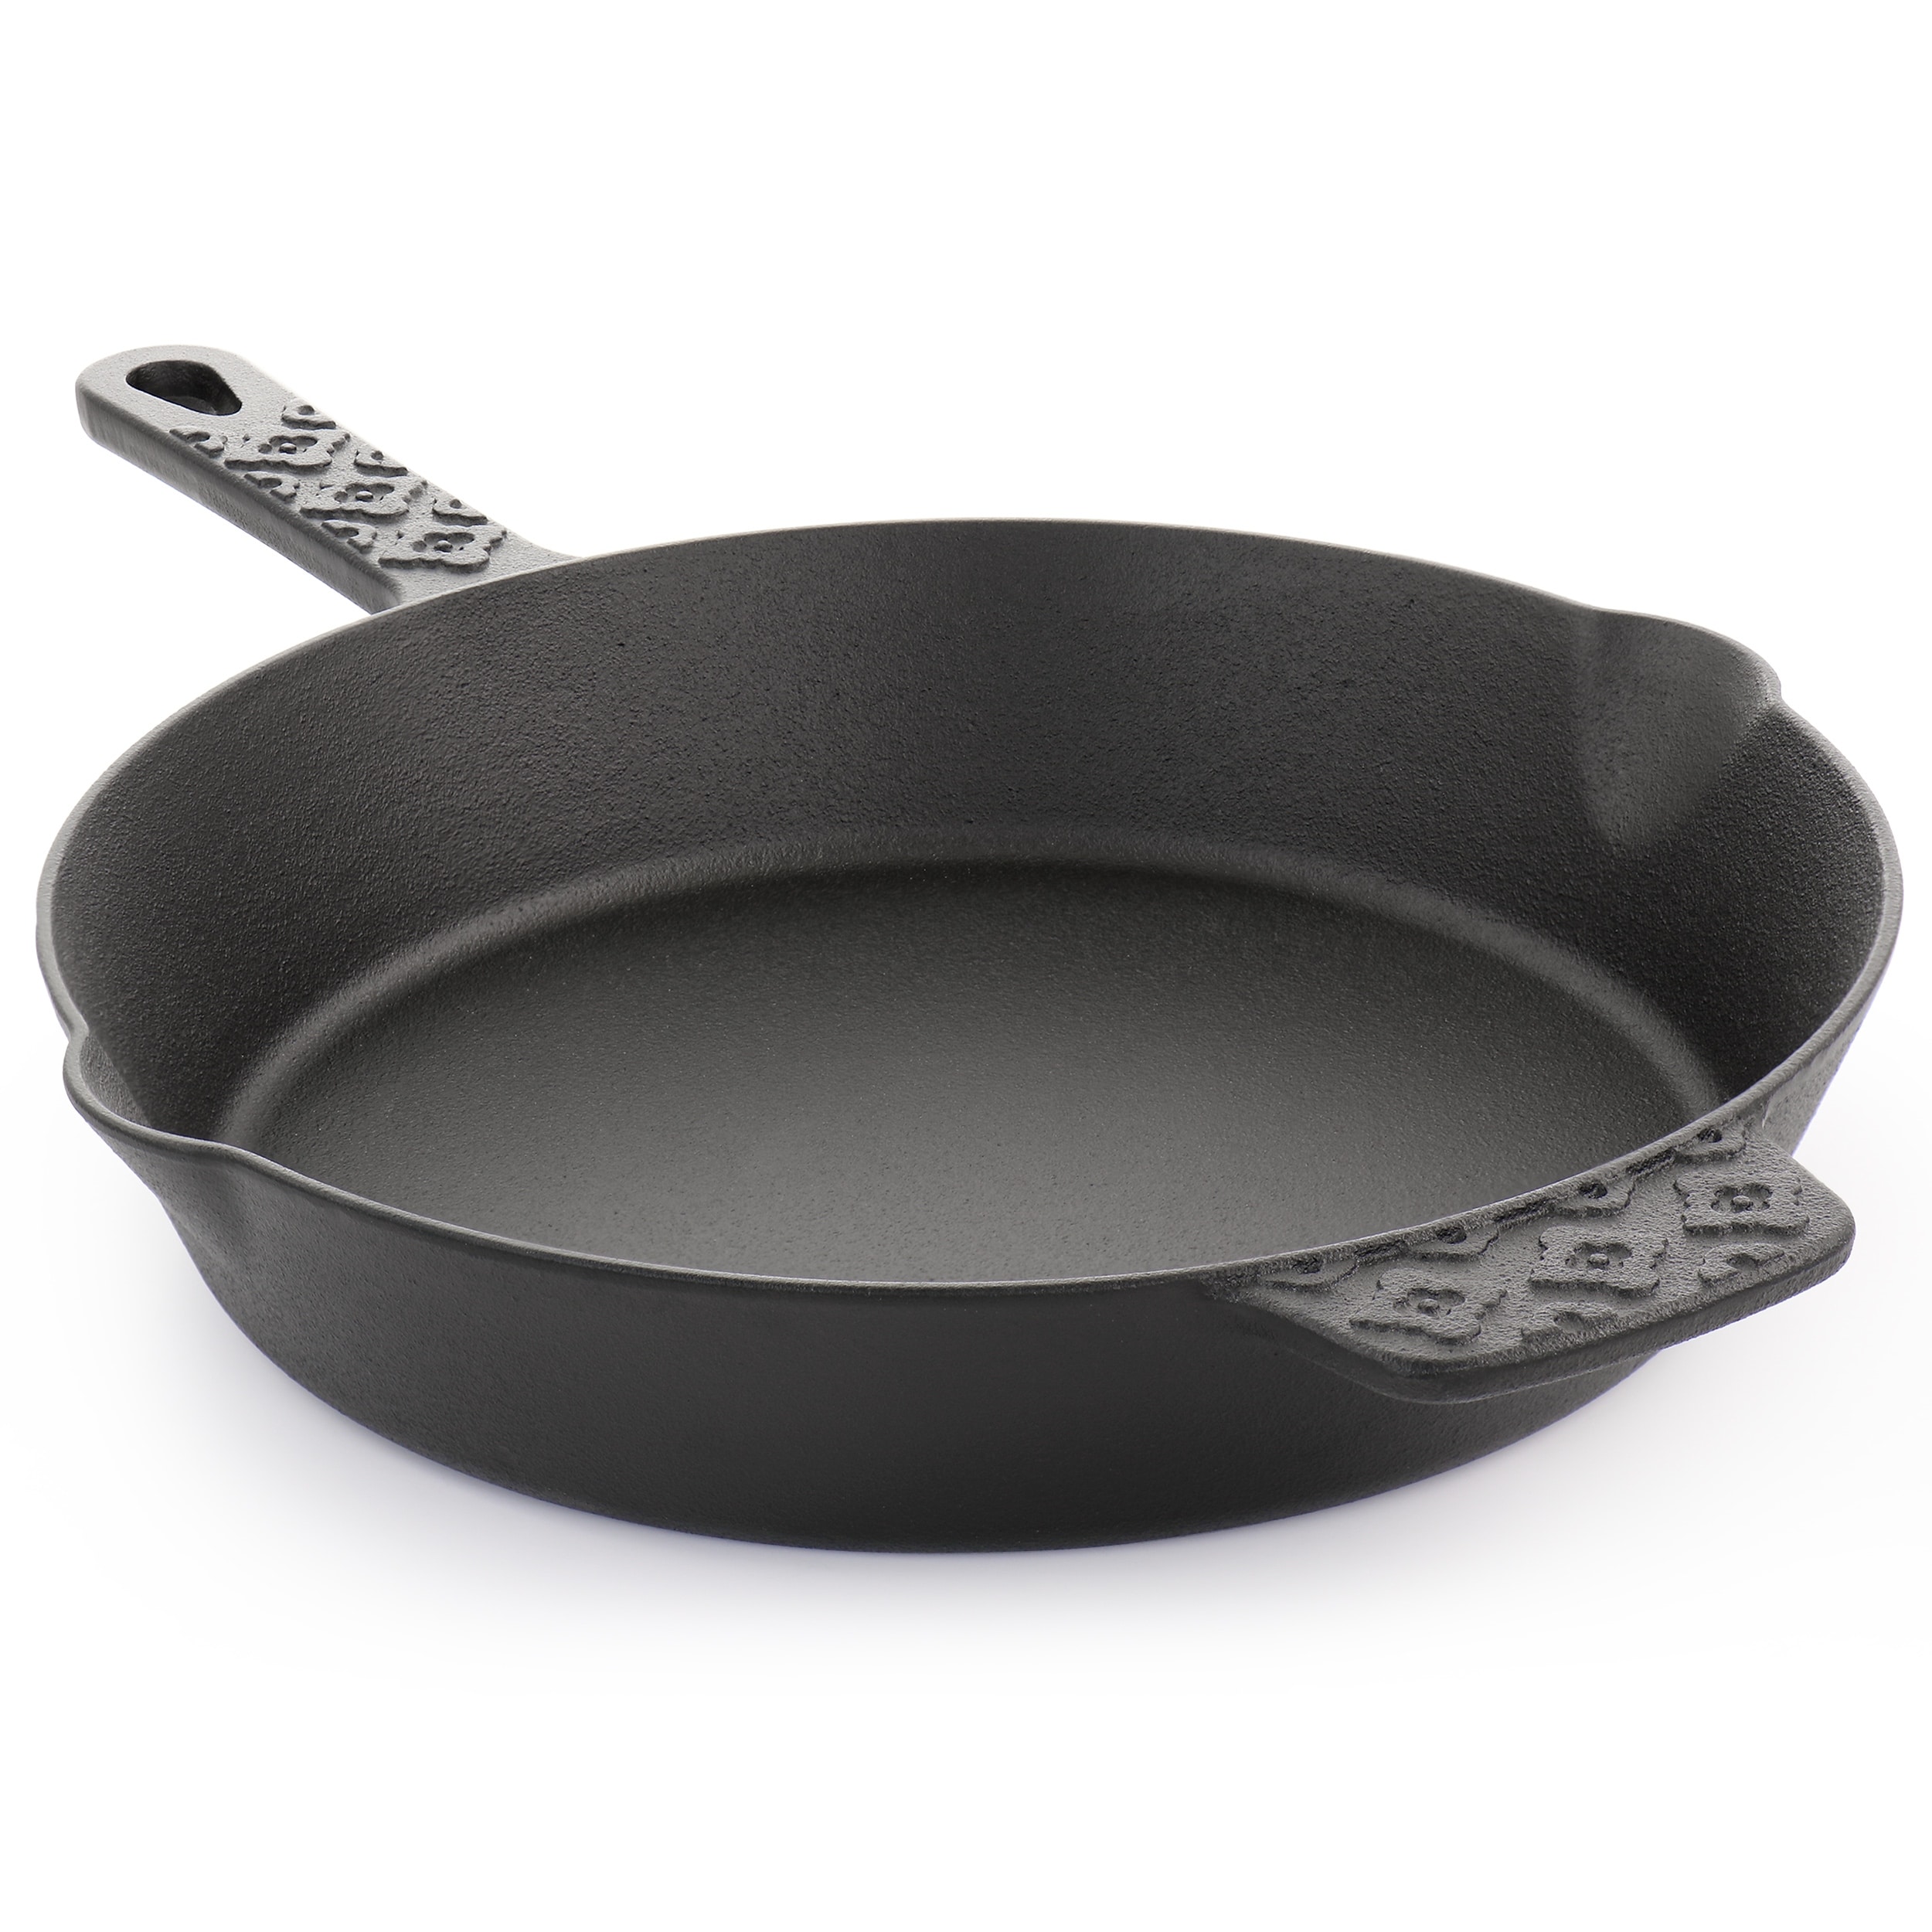 https://ak1.ostkcdn.com/images/products/is/images/direct/53724810dbf0c1591cd27e17e4b45a2eca69f72f/12-Inch-Cast-Iron-Skillet-with-Pouring-Spouts.jpg